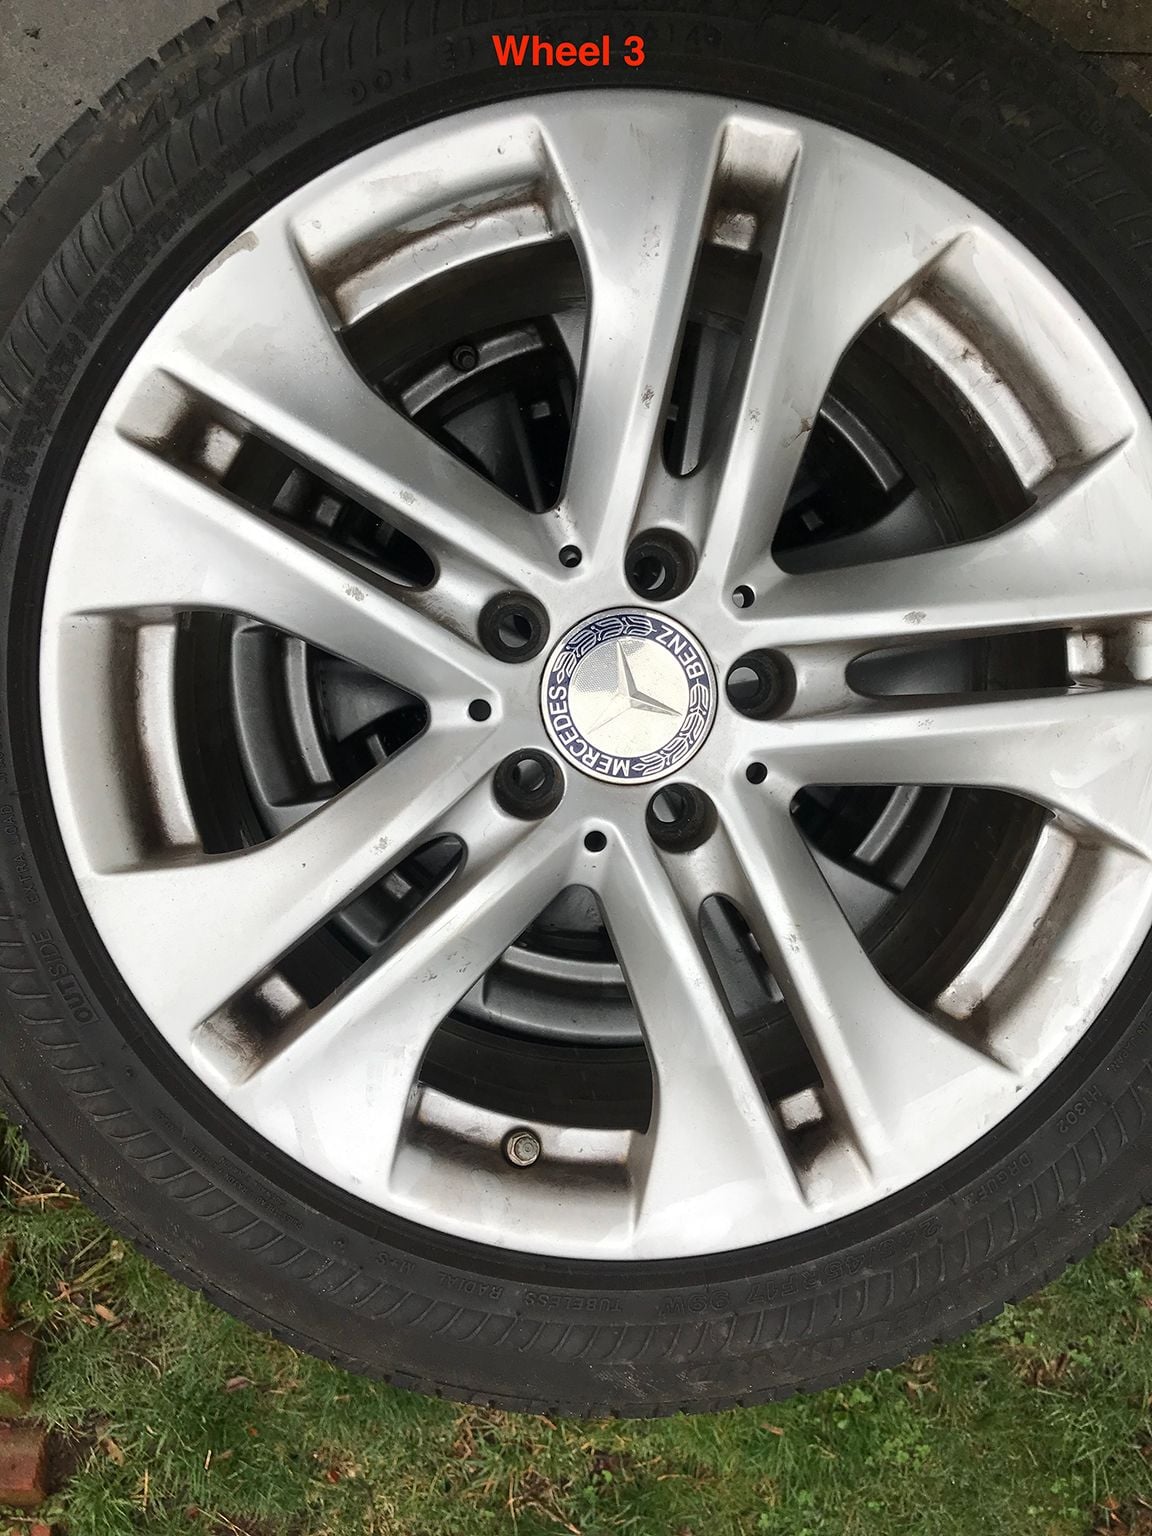 Wheels and Tires/Axles - Four 17" Wheels and Tires and TPMS off 2011 W212 - Used - 2011 to 2017 Mercedes-Benz E350 - Hartford, CT 06105, United States